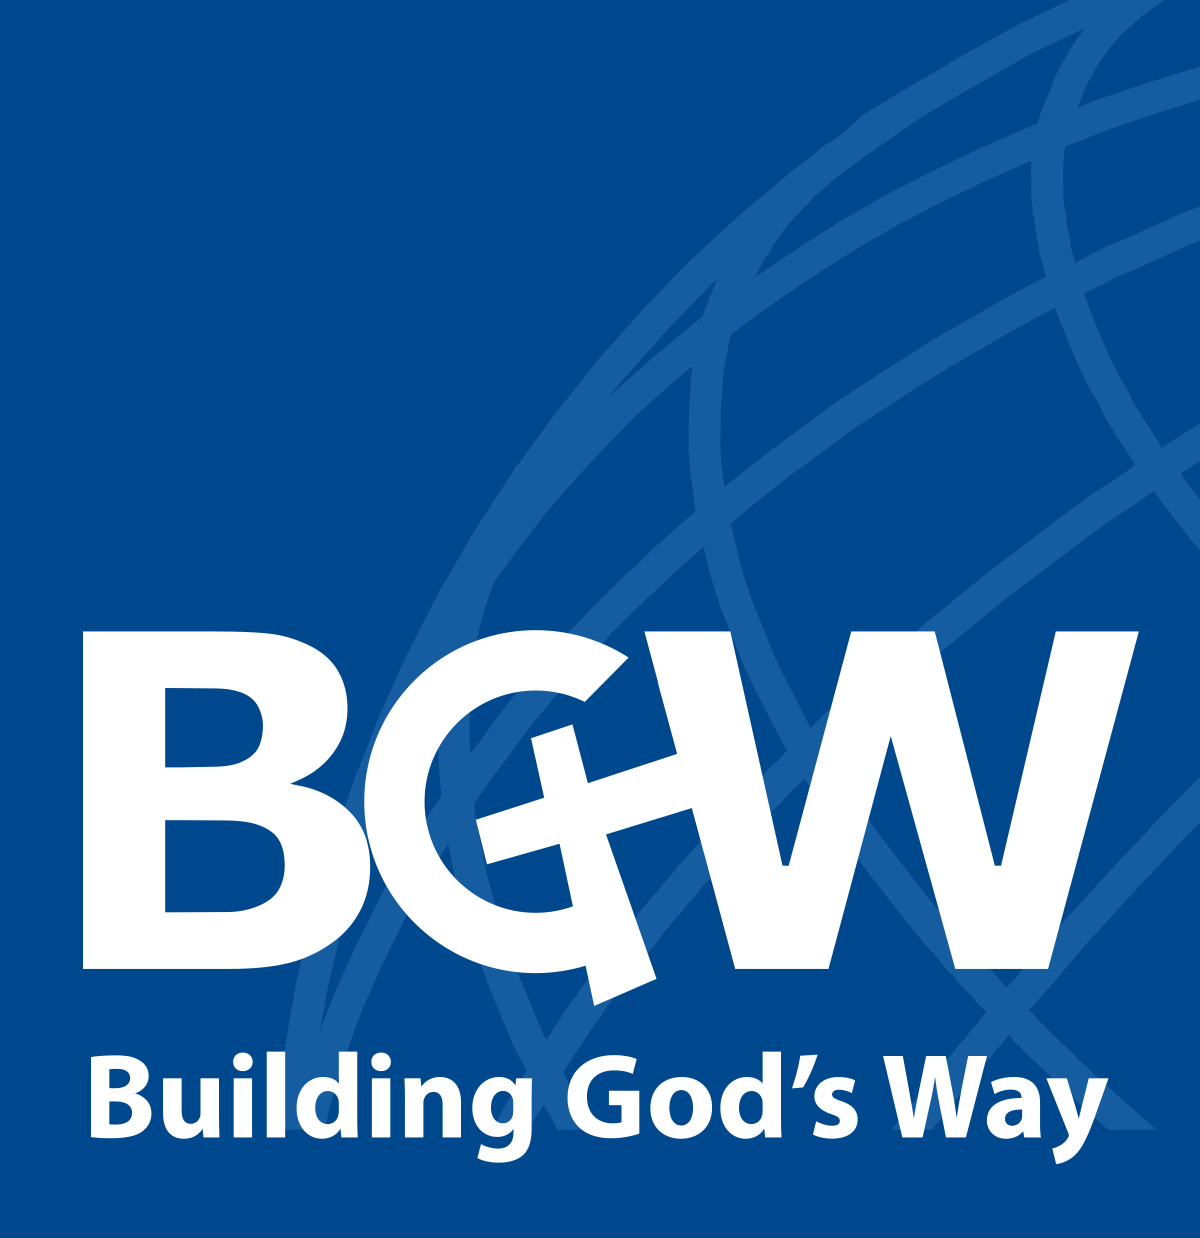 Building God's Way - A Network of Kingdom Building Services